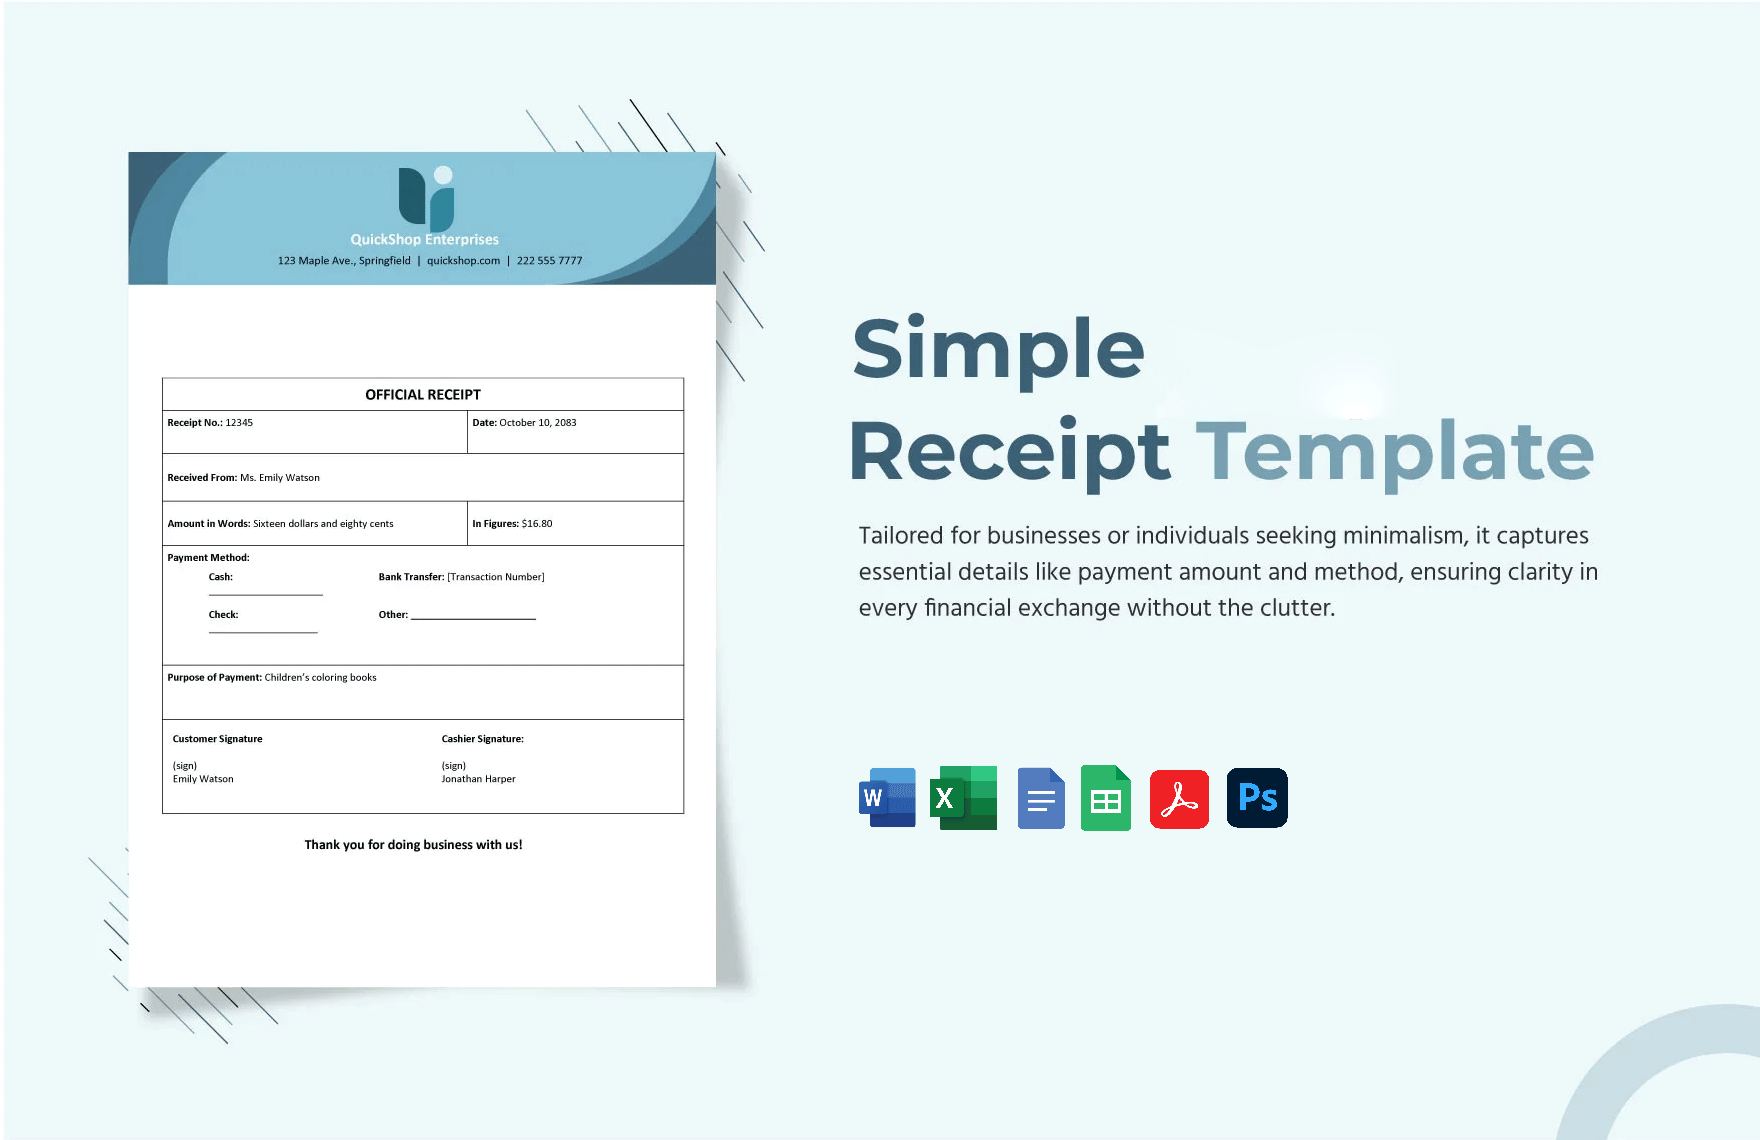 Free Simple Receipt Template in Word, Google Docs, Excel, PDF, Google Sheets, PSD